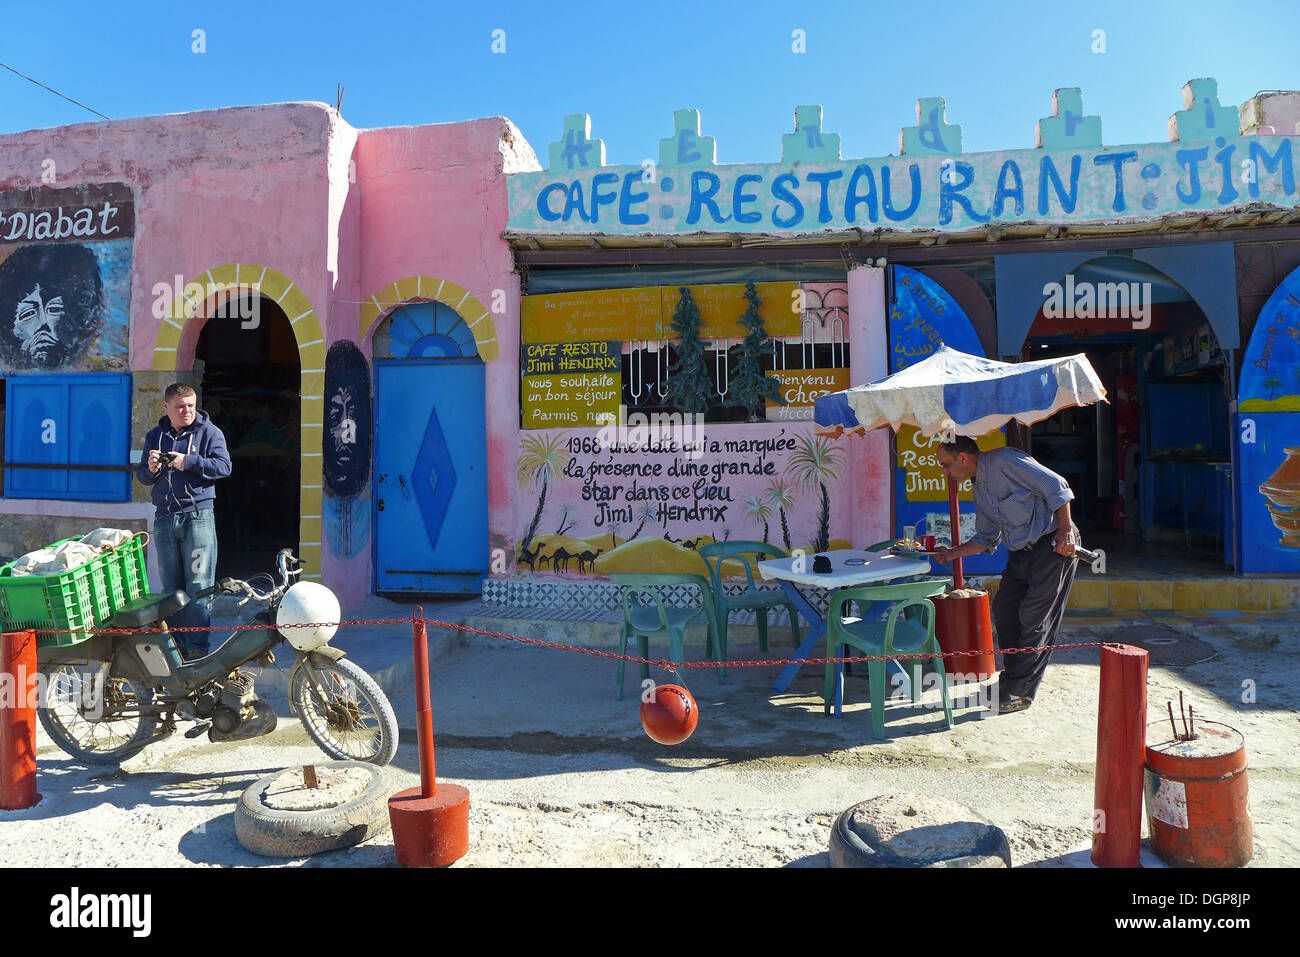 Morocco - Essaouira Cafe frequented by Jimi Hendrix in the 1960s, at Diabat. Stock Photo